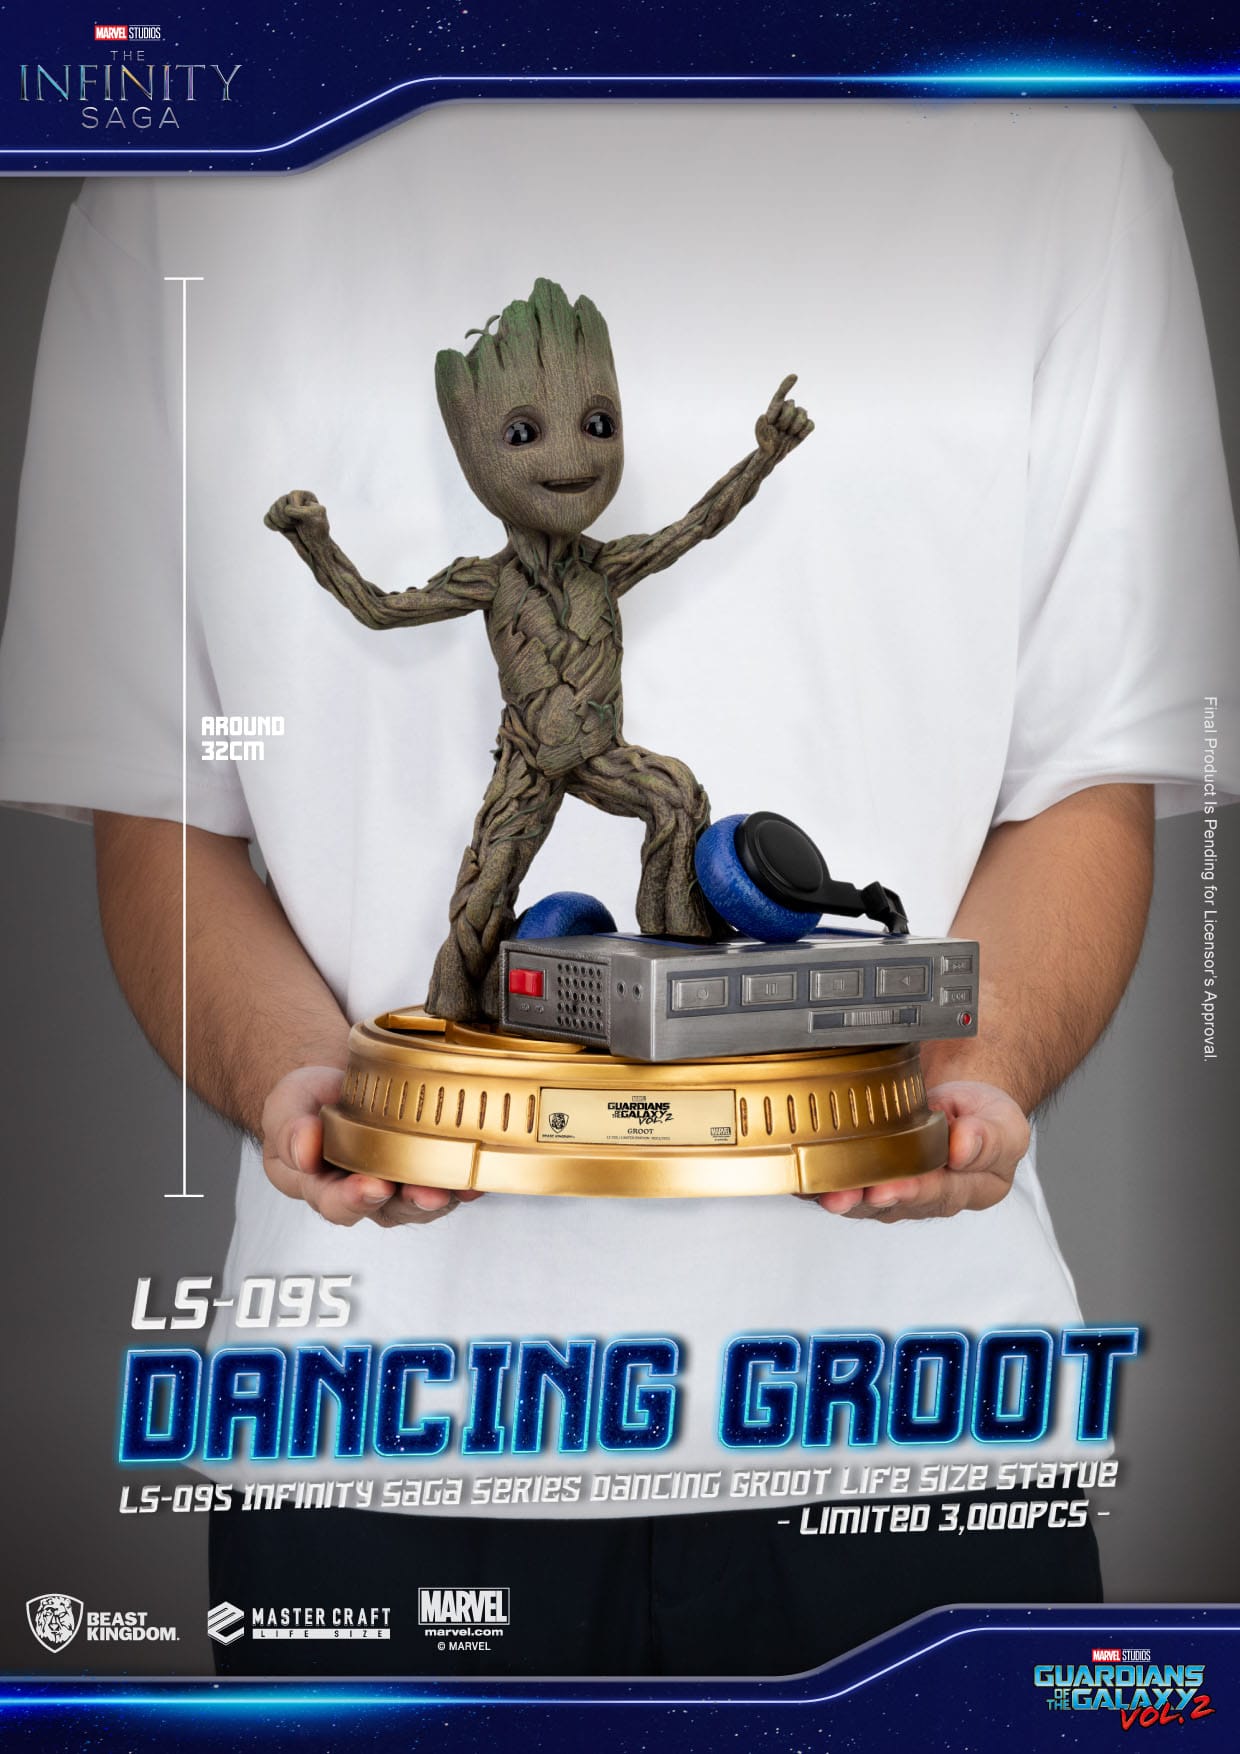 Statuette 1/1 Guardians of the Galaxy 2 - Dancing Groot - PRE-ORDER